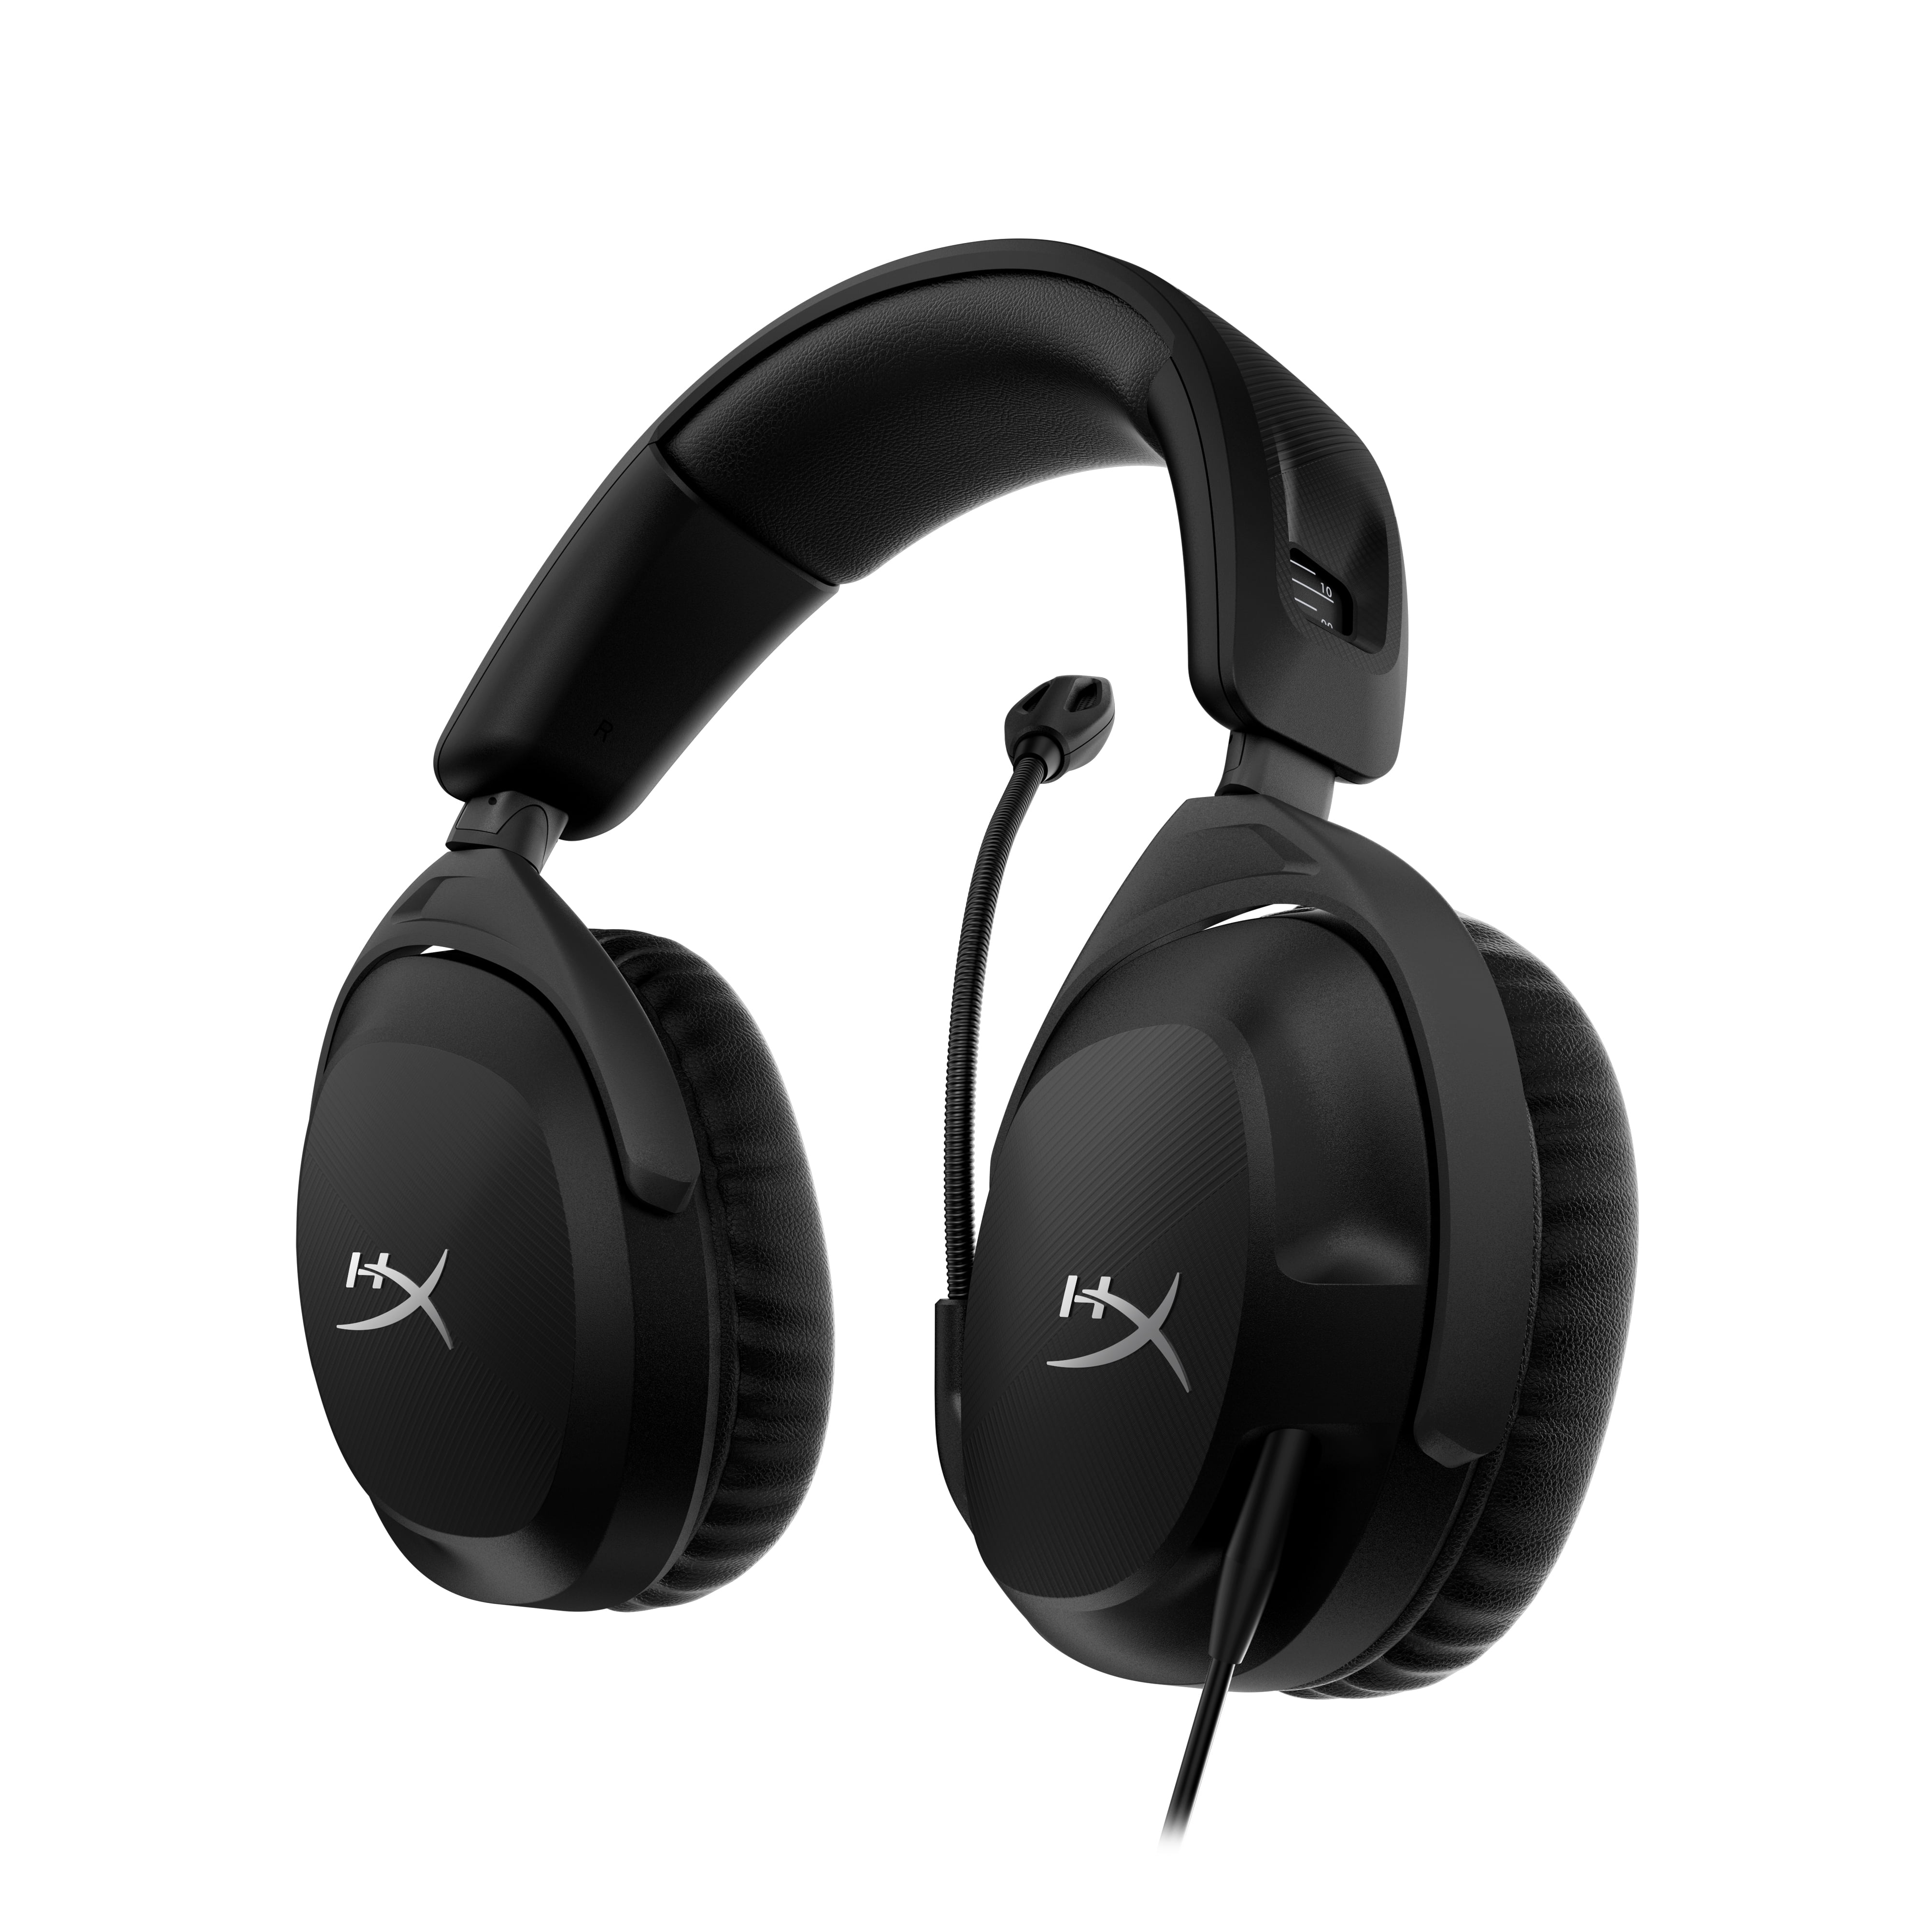  HyperX Cloud Stinger 2 Core – PC Gaming Headset, Lightweight  Over-Ear Headset with mic, Swivel-to-Mute mic Function, DTS Headphone:X  Spatial Audio, 40mm Drivers,Black : Video Games